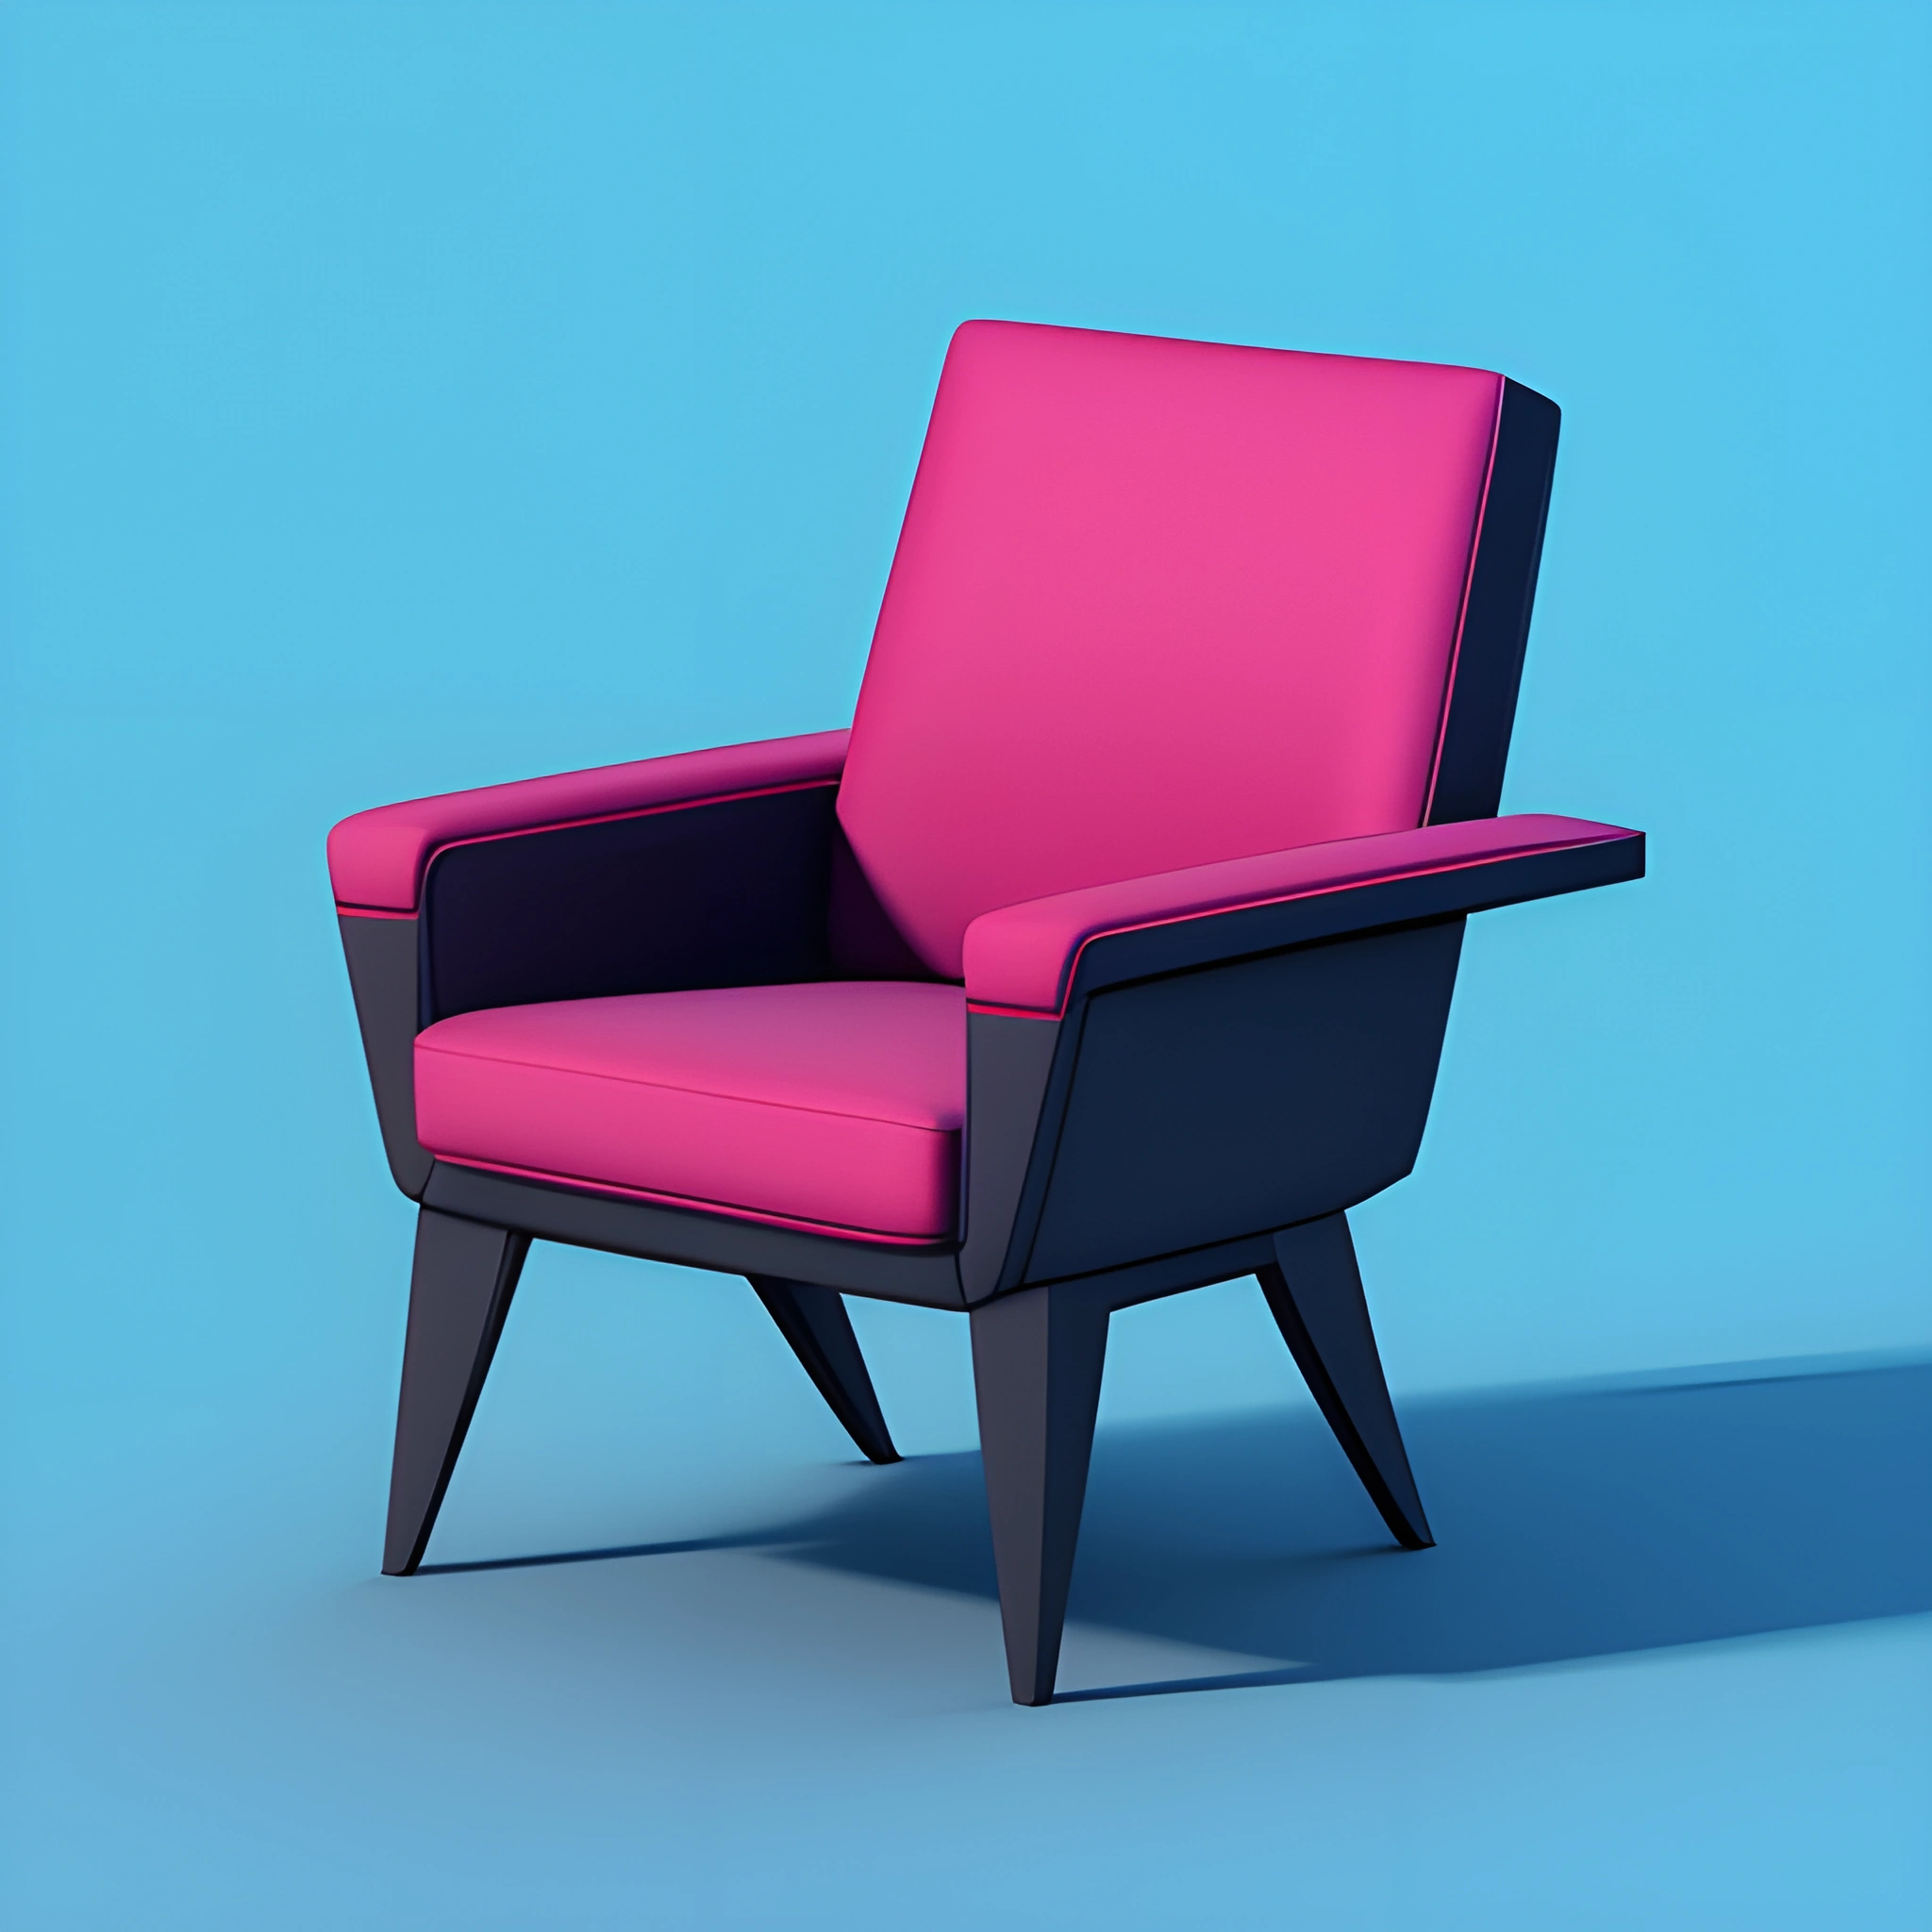 chair with pink upholstered seat against a blue background